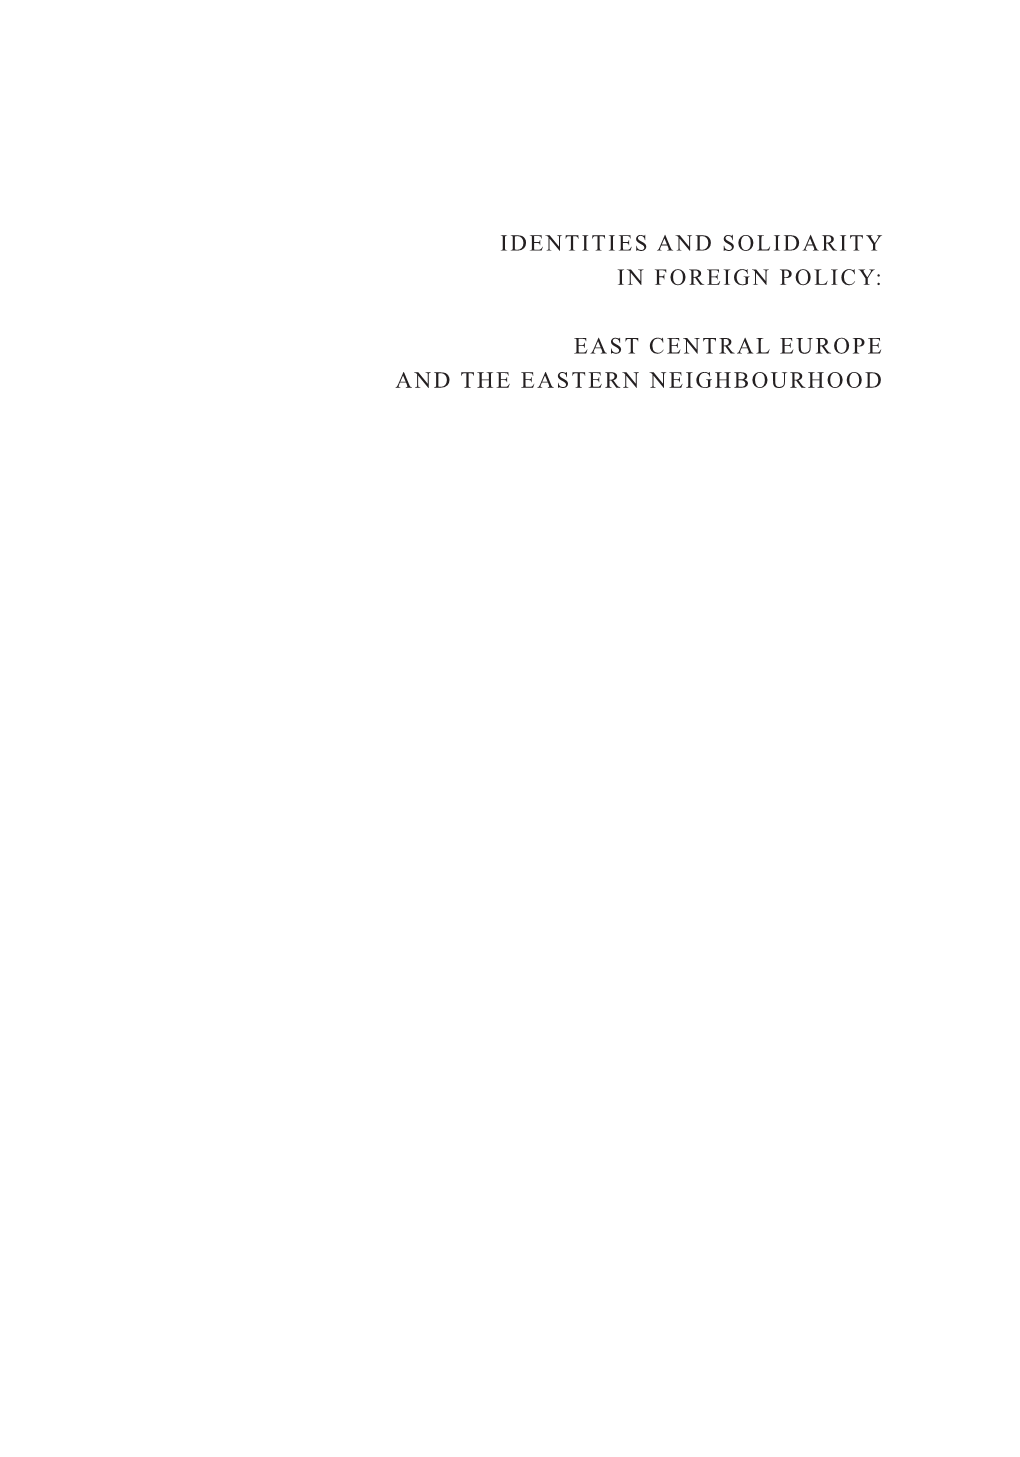 Identities and Solidarity in Foreign Policy: East